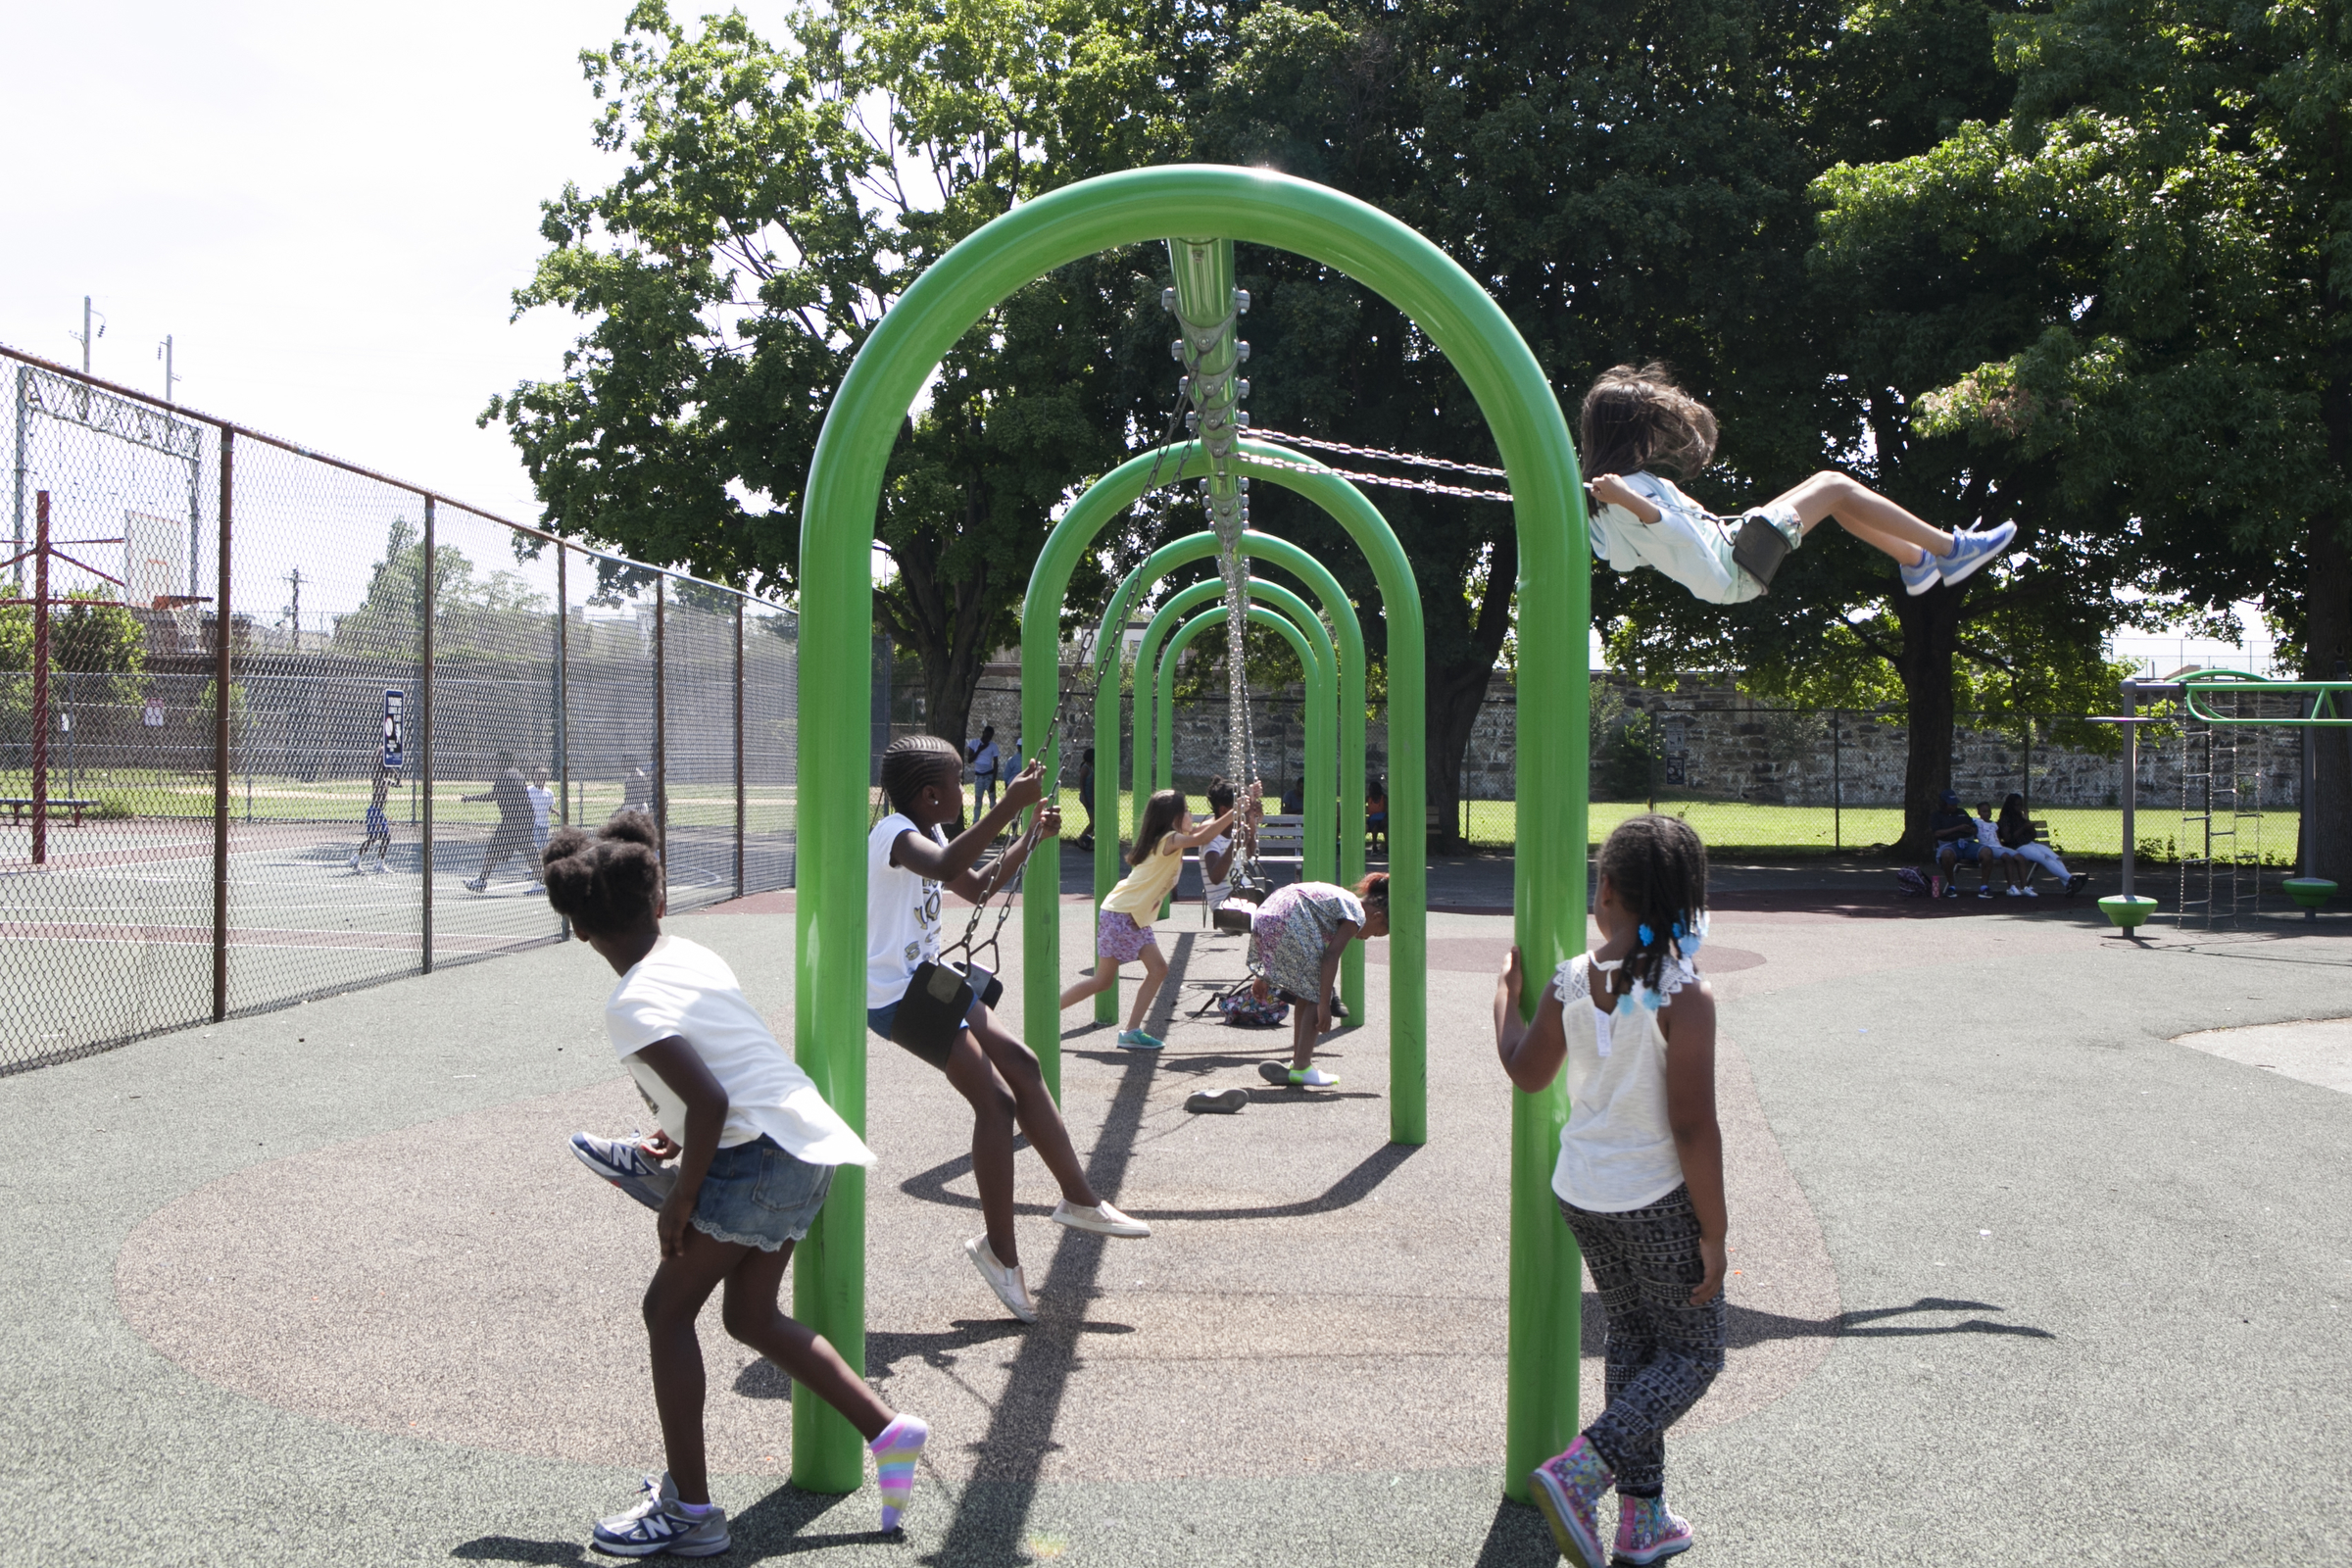 Camp kids play on the swings on the morning of June 29. | Maggie Loesch for PlanPhilly           